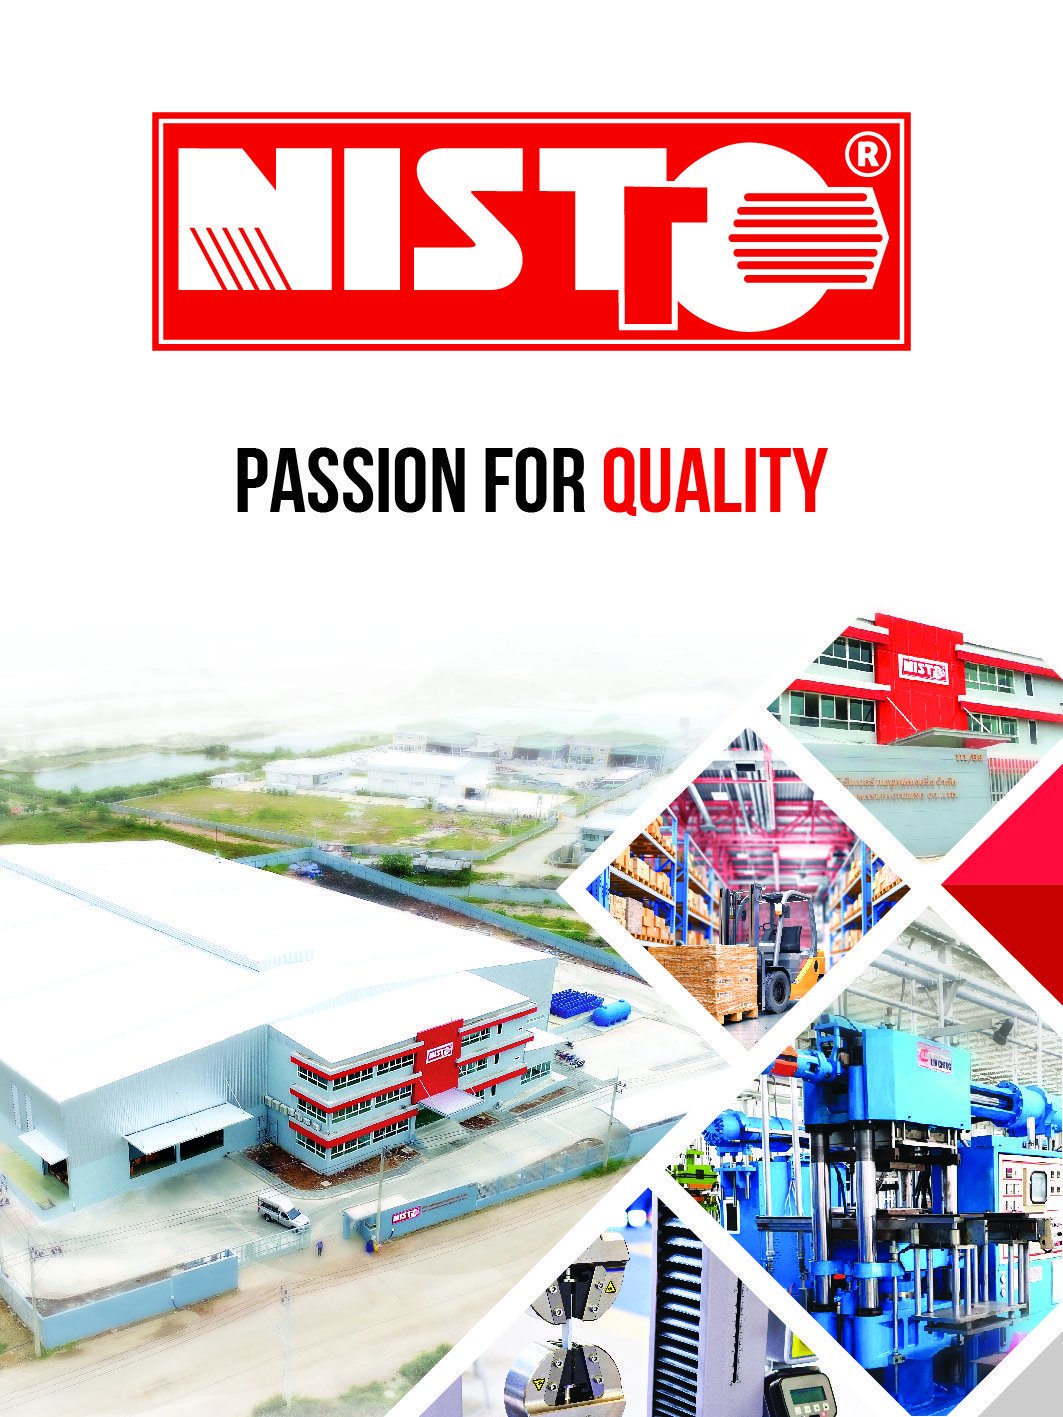 Nisto factory, OEM production, passion for quality, engine mounting, vr auto part